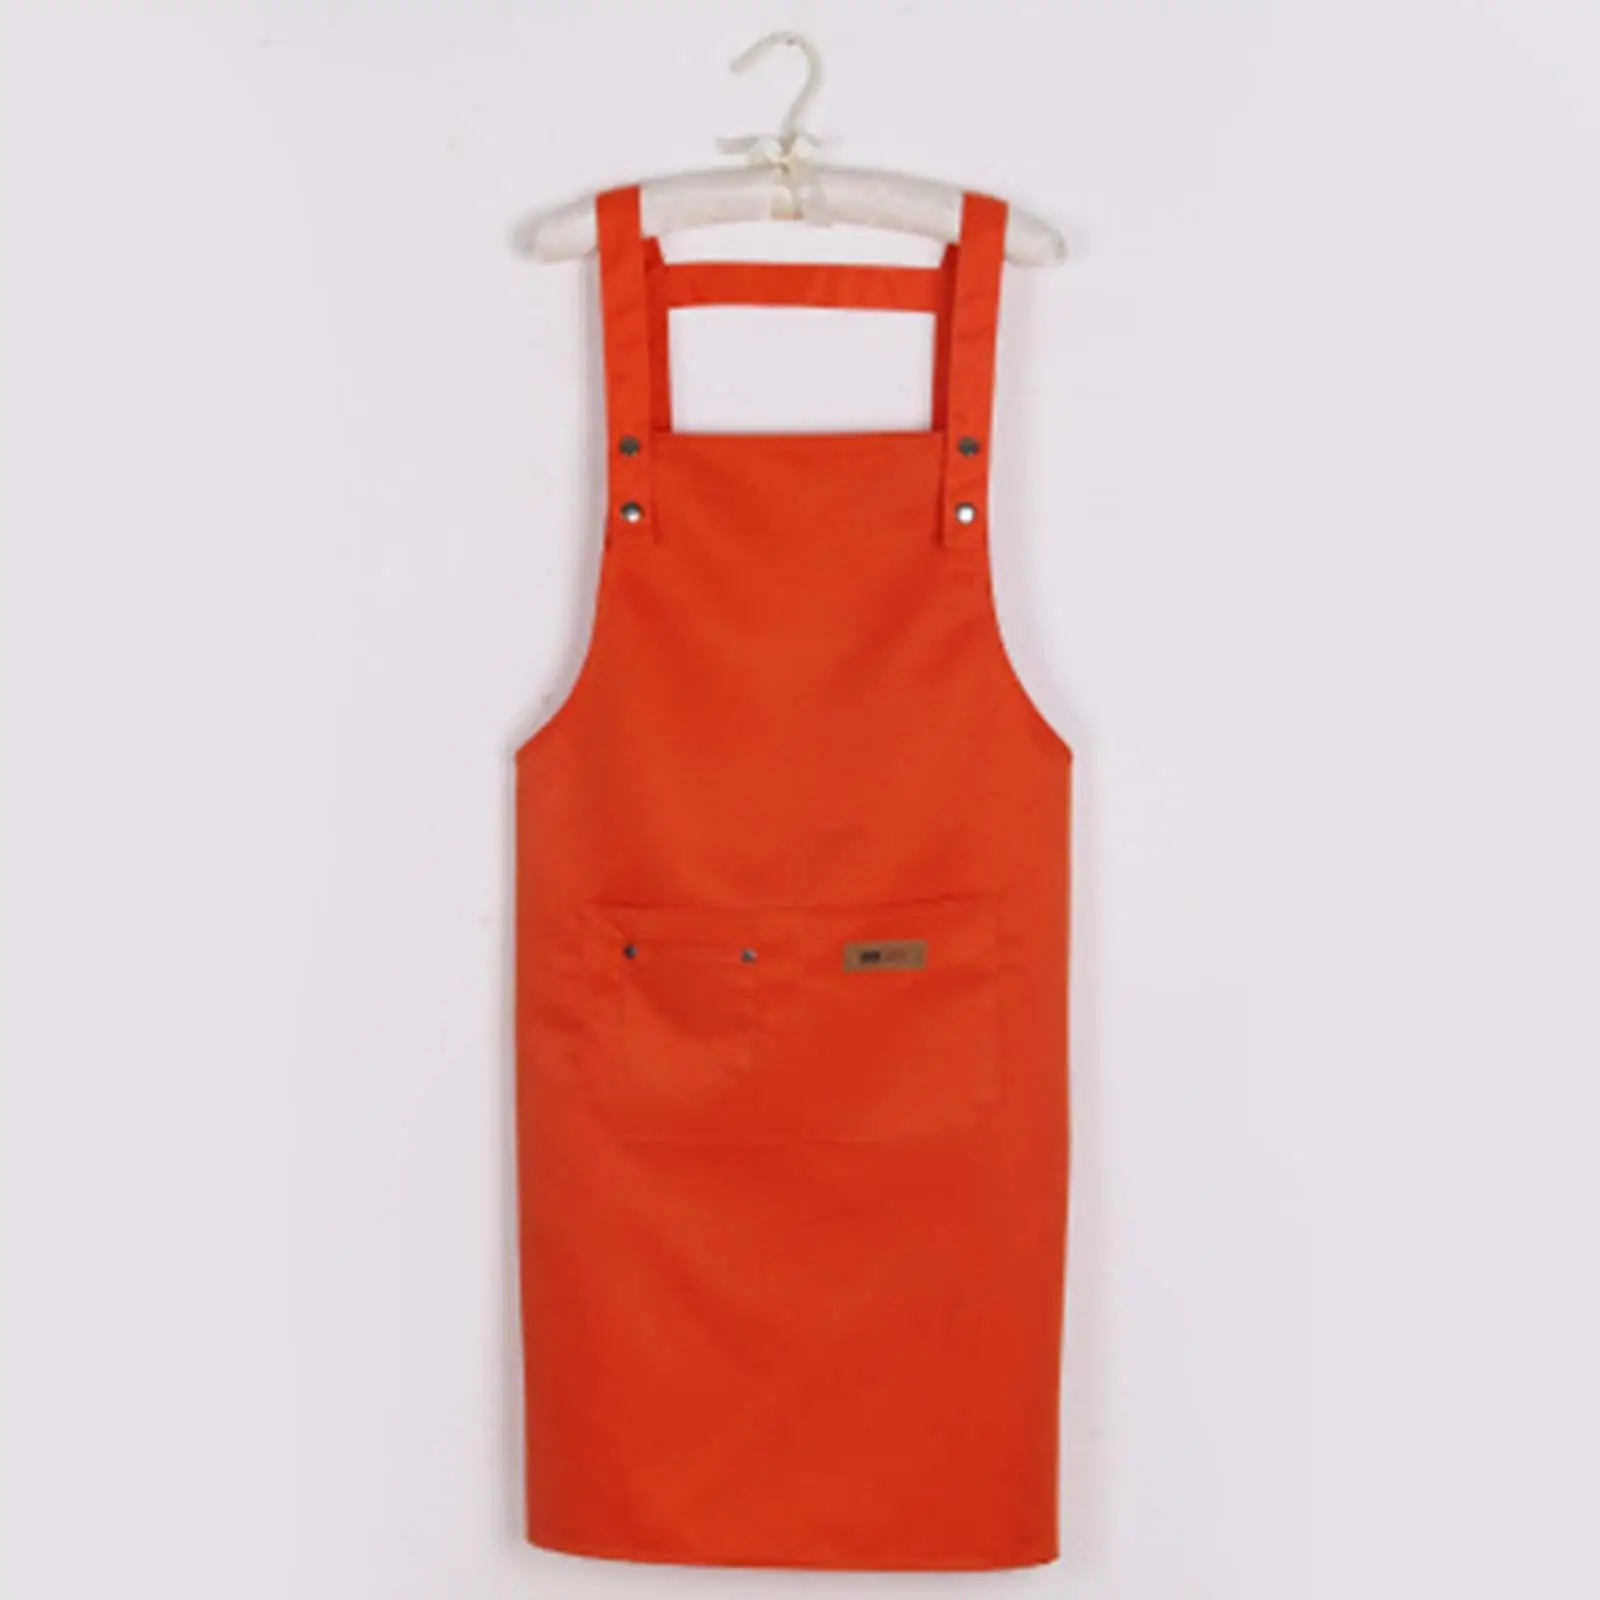 Adjustable Apron Kitchen   Apron for Gardening Cooking Drawing BBQ Restaurant